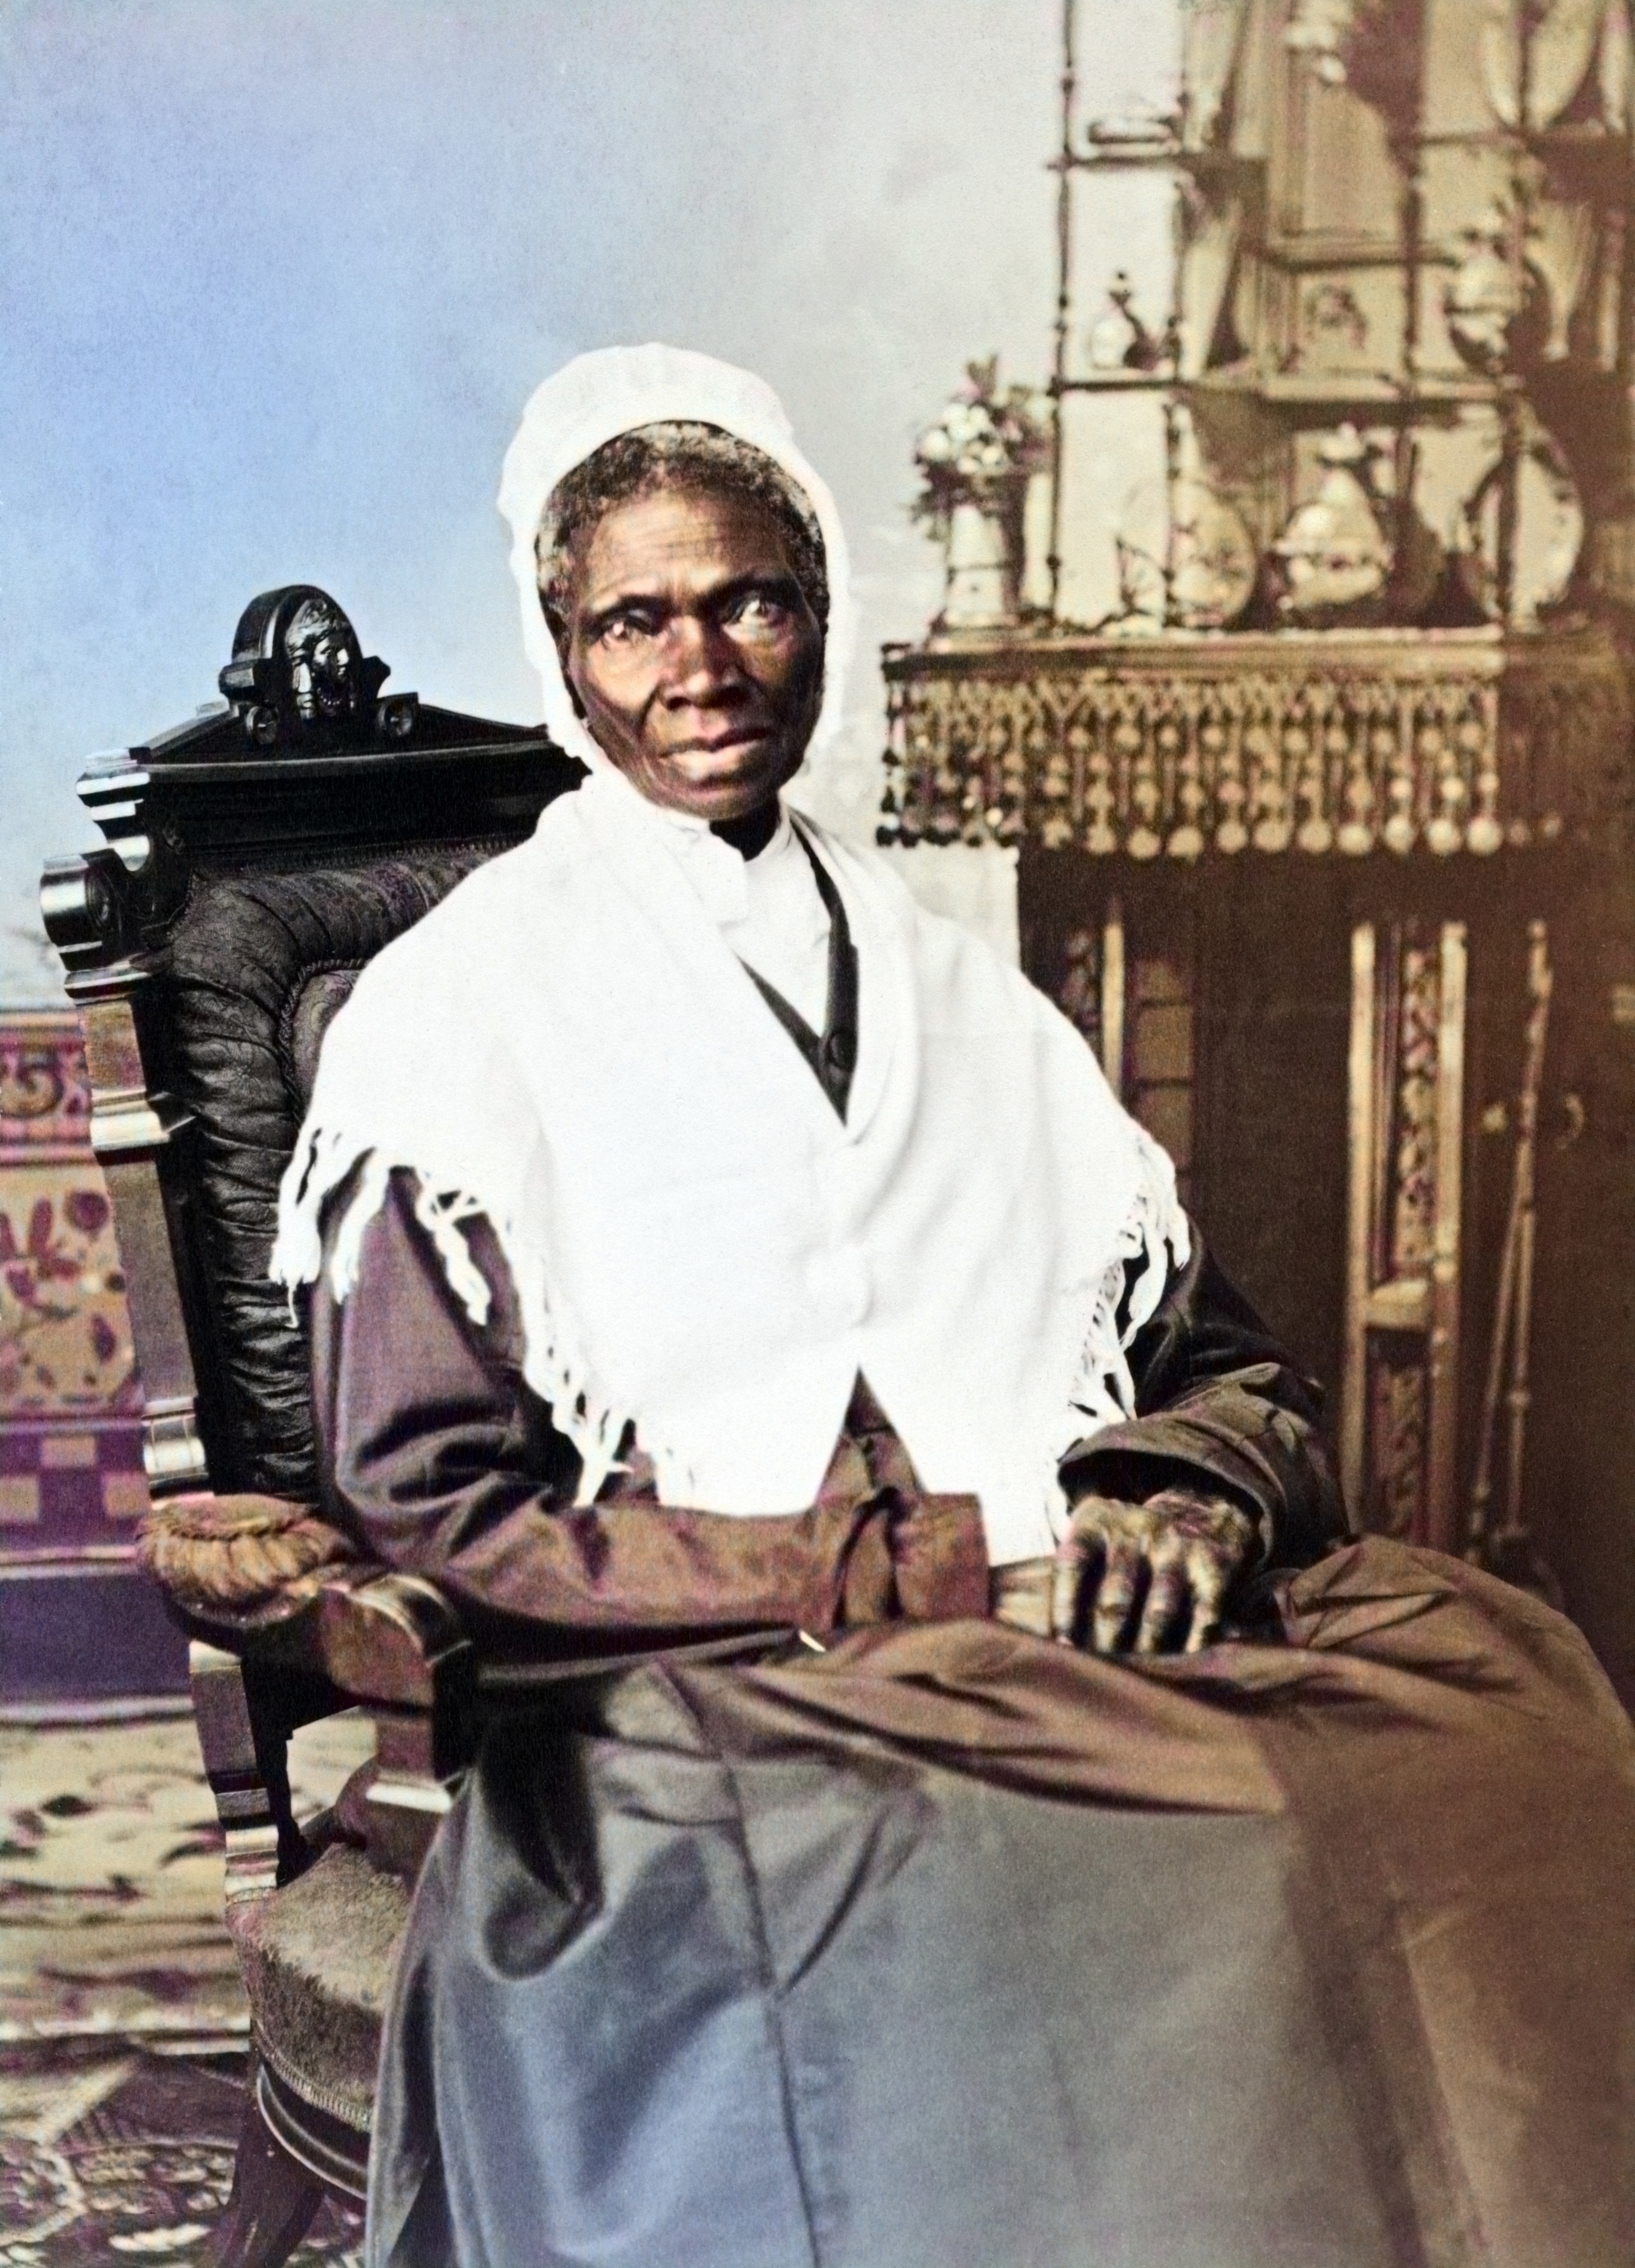 Sojourner Truth sits in a chair in a portrait from 1870